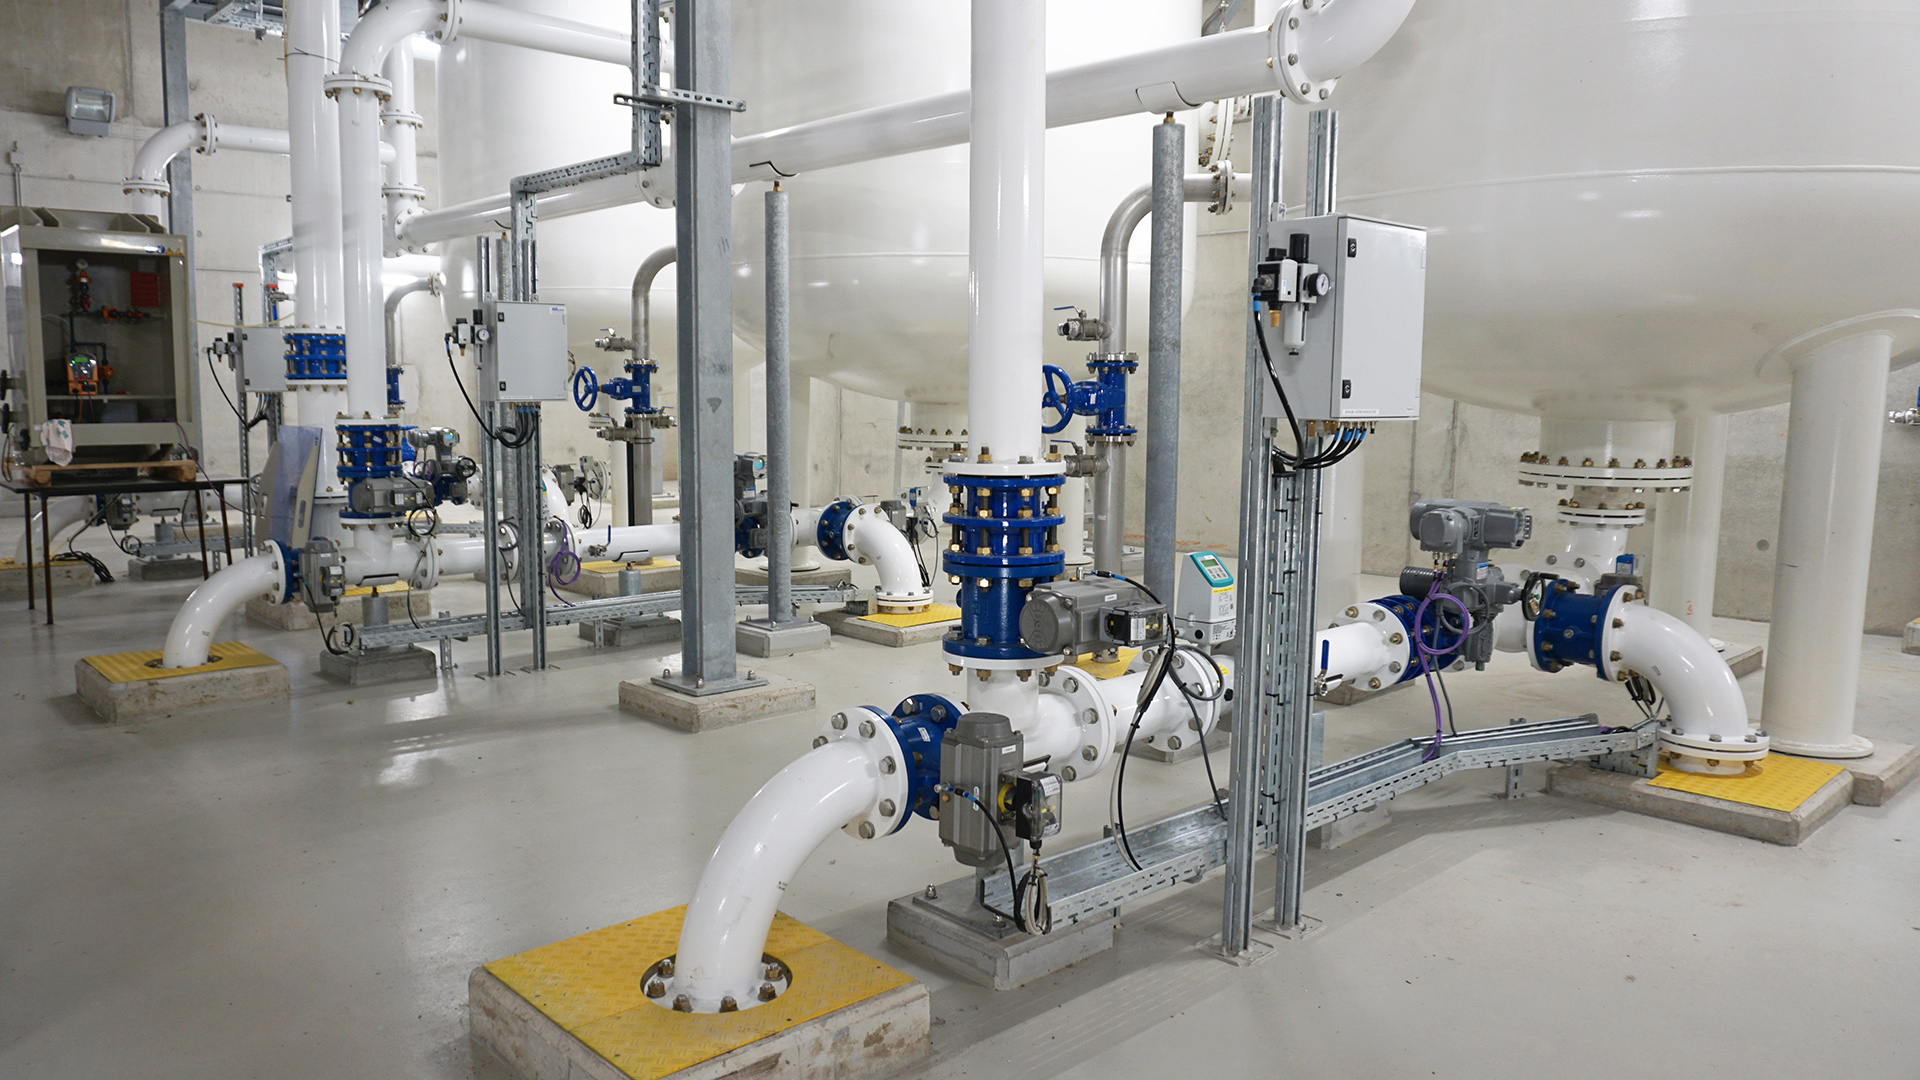 Eeklo Water treatment plant valves installed